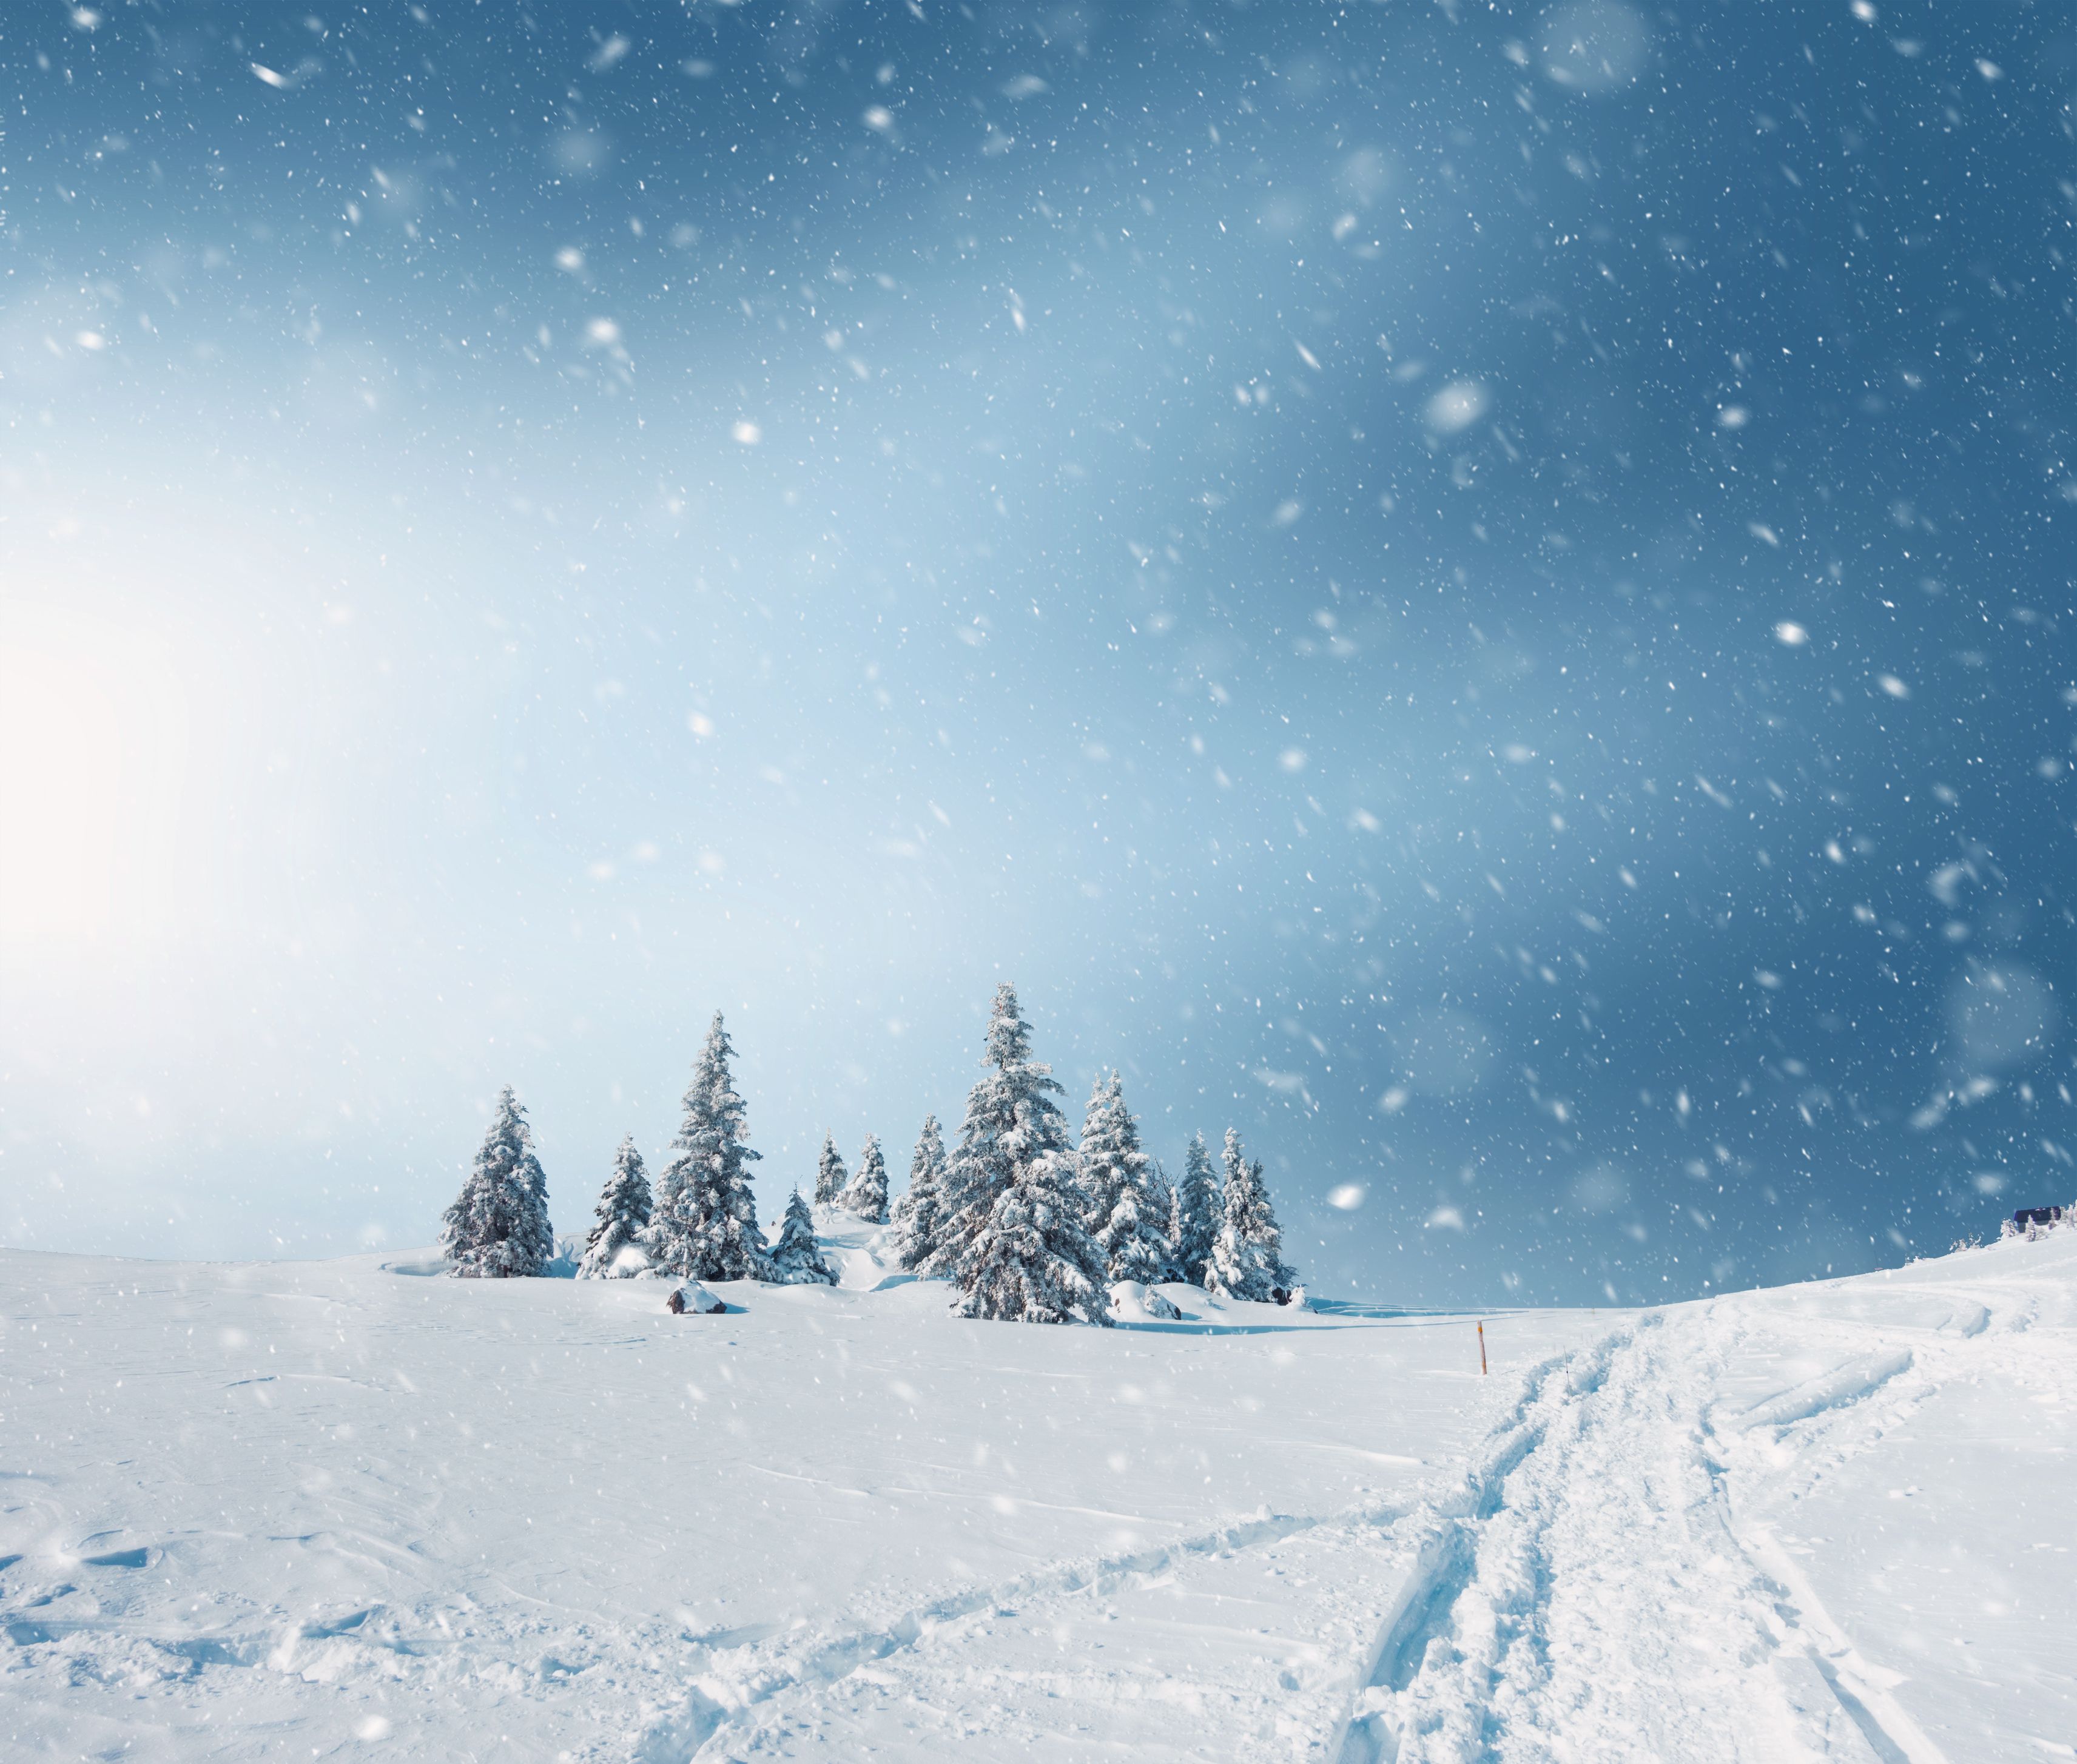 27 Best Winter Quotes - Short Sayings and Quotes About Winter